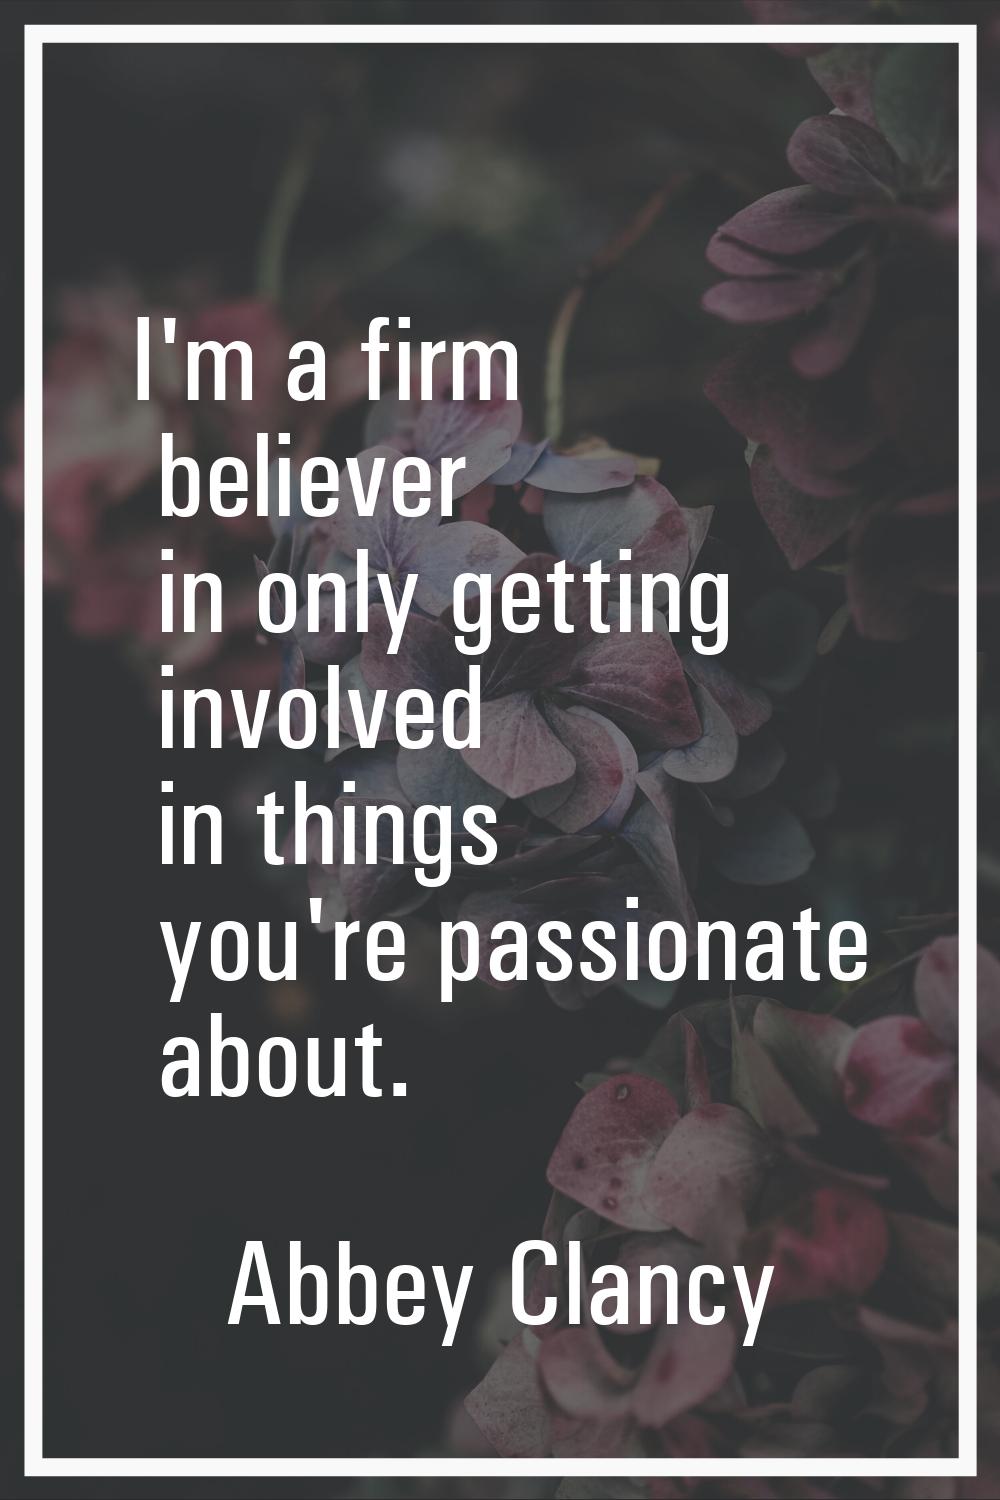 I'm a firm believer in only getting involved in things you're passionate about.